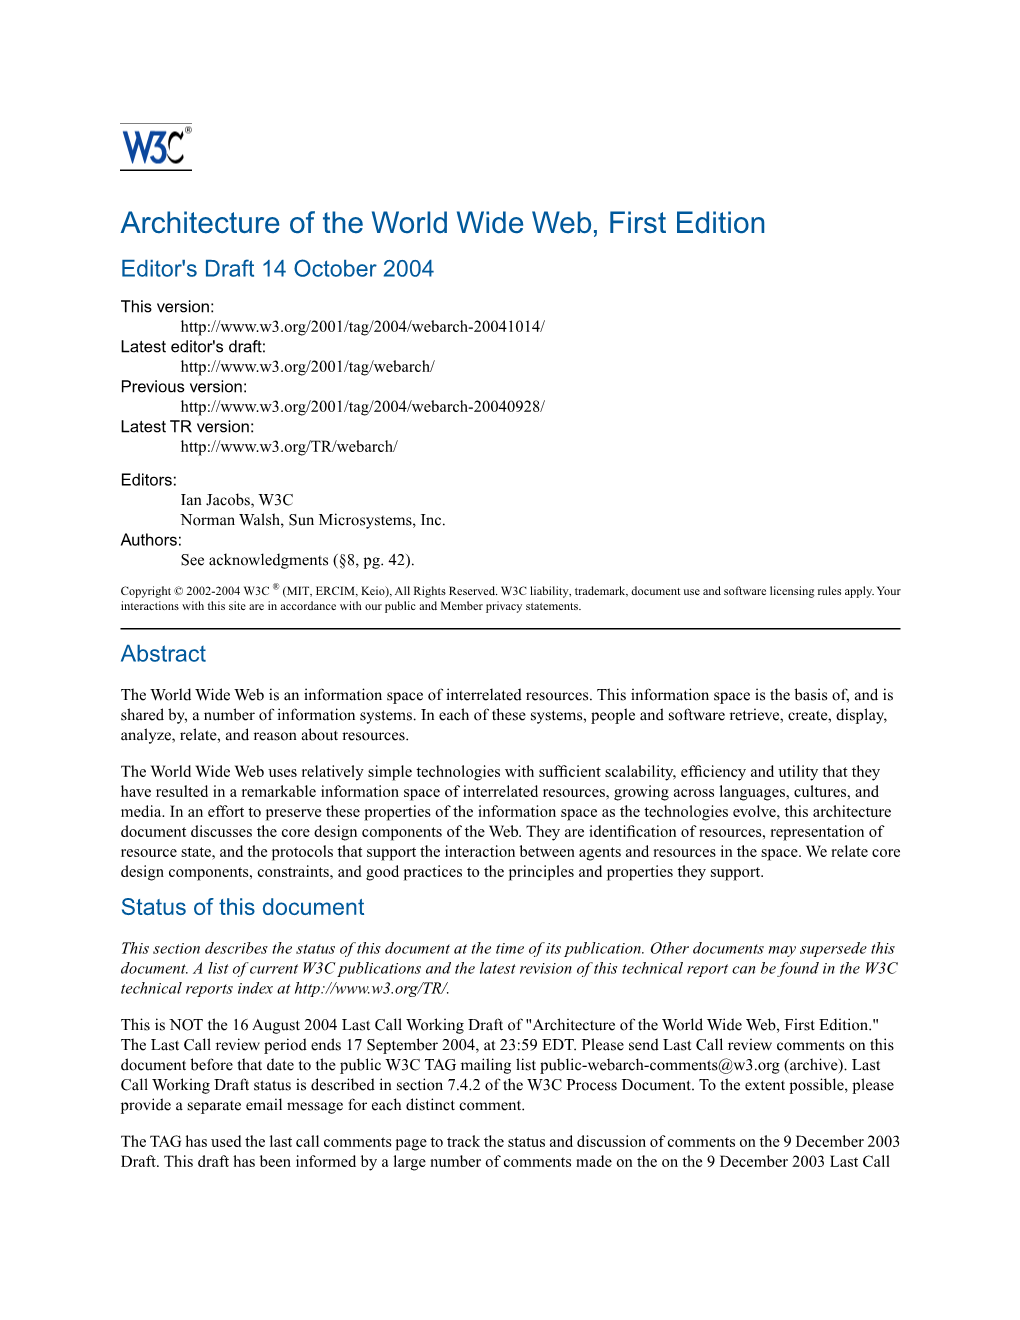 Architecture of the World Wide Web, First Edition Editor's Draft 14 October 2004